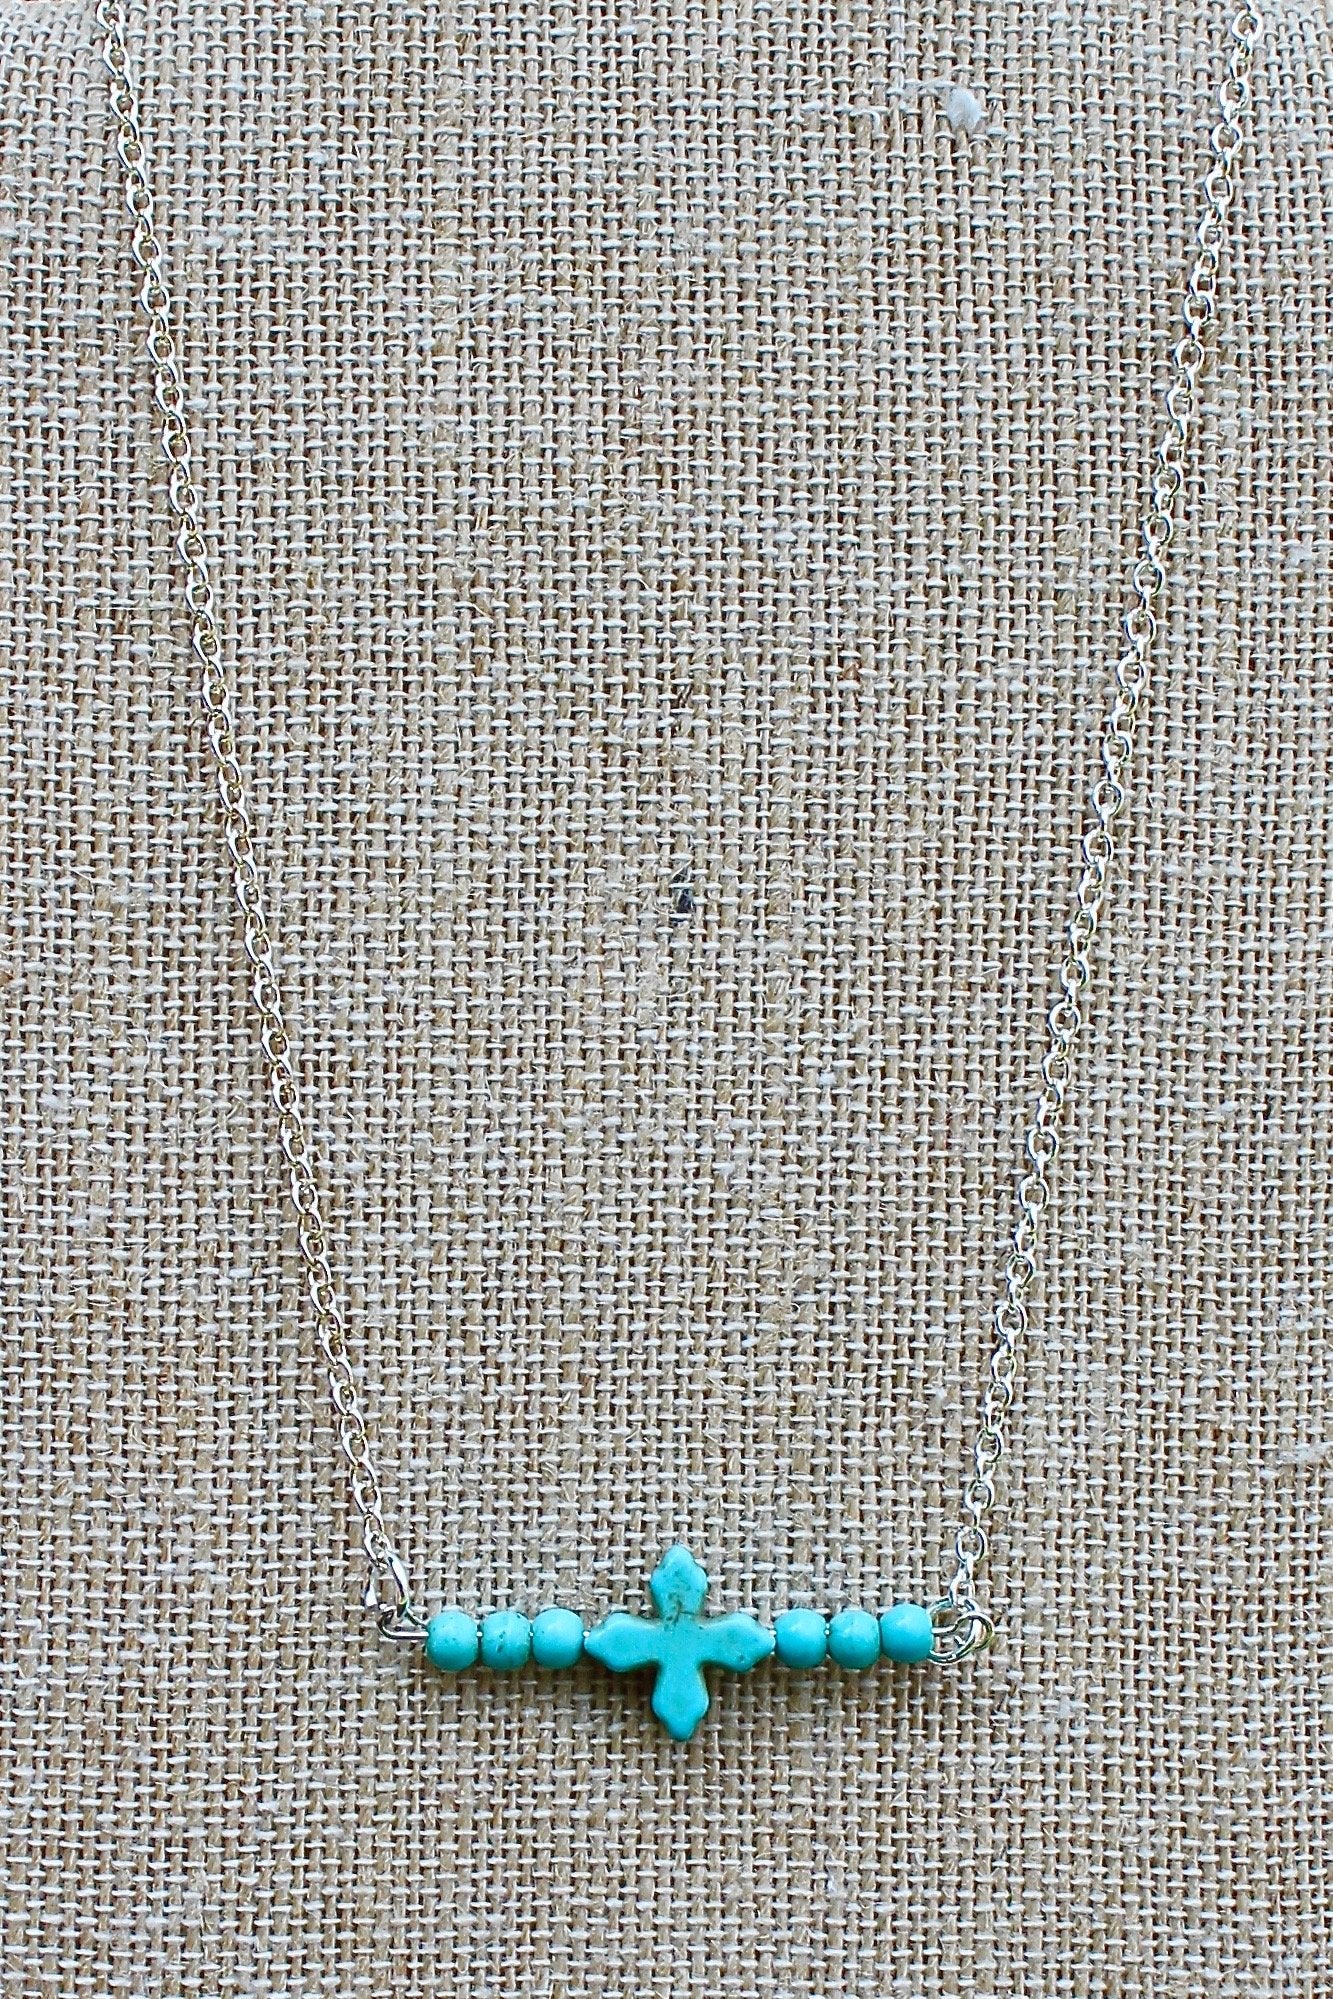 N150ST; Turquoise Stone Cross; Beads; Silvertone Chain; Approximately 16 inches; ; ; Majestees